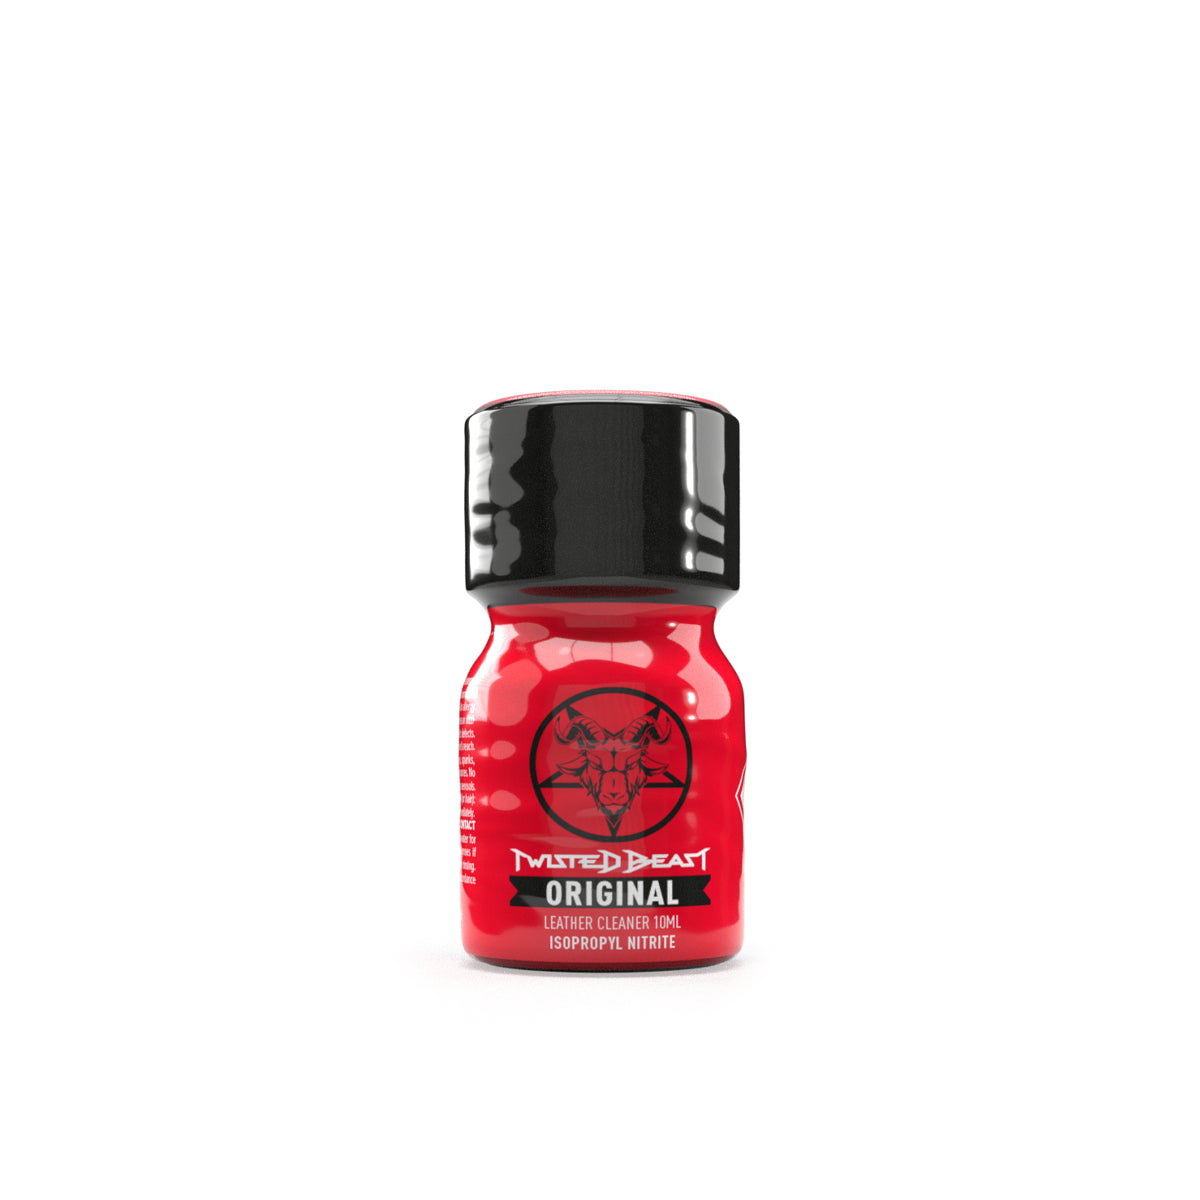 A 10ml bottle of Twisted Beast Original Poppers.